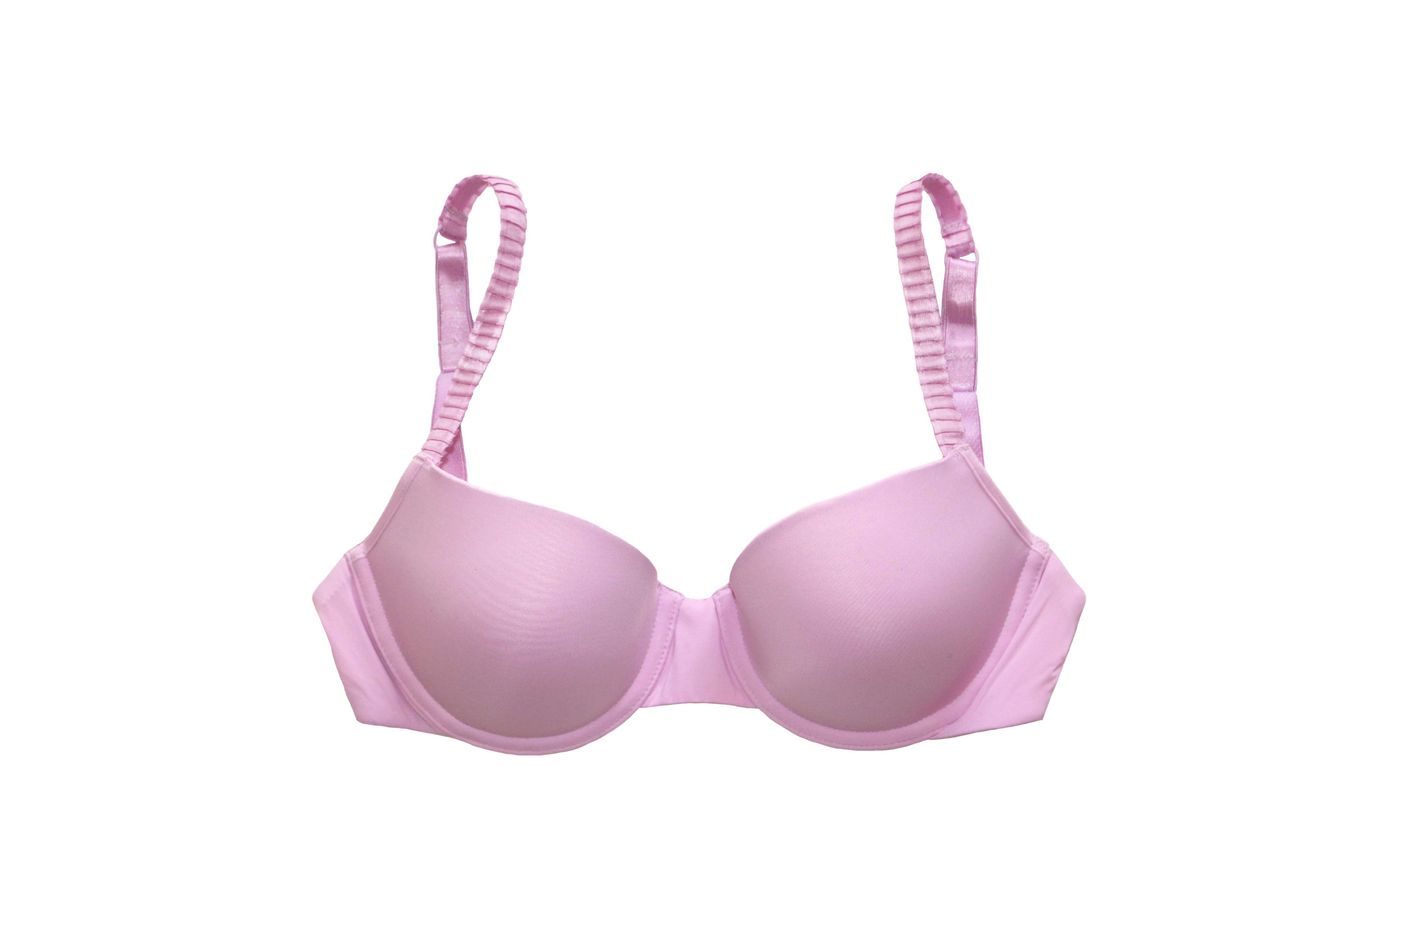 80% of People Wear the Wrong Bra Size—Here's How ThirdLove Is